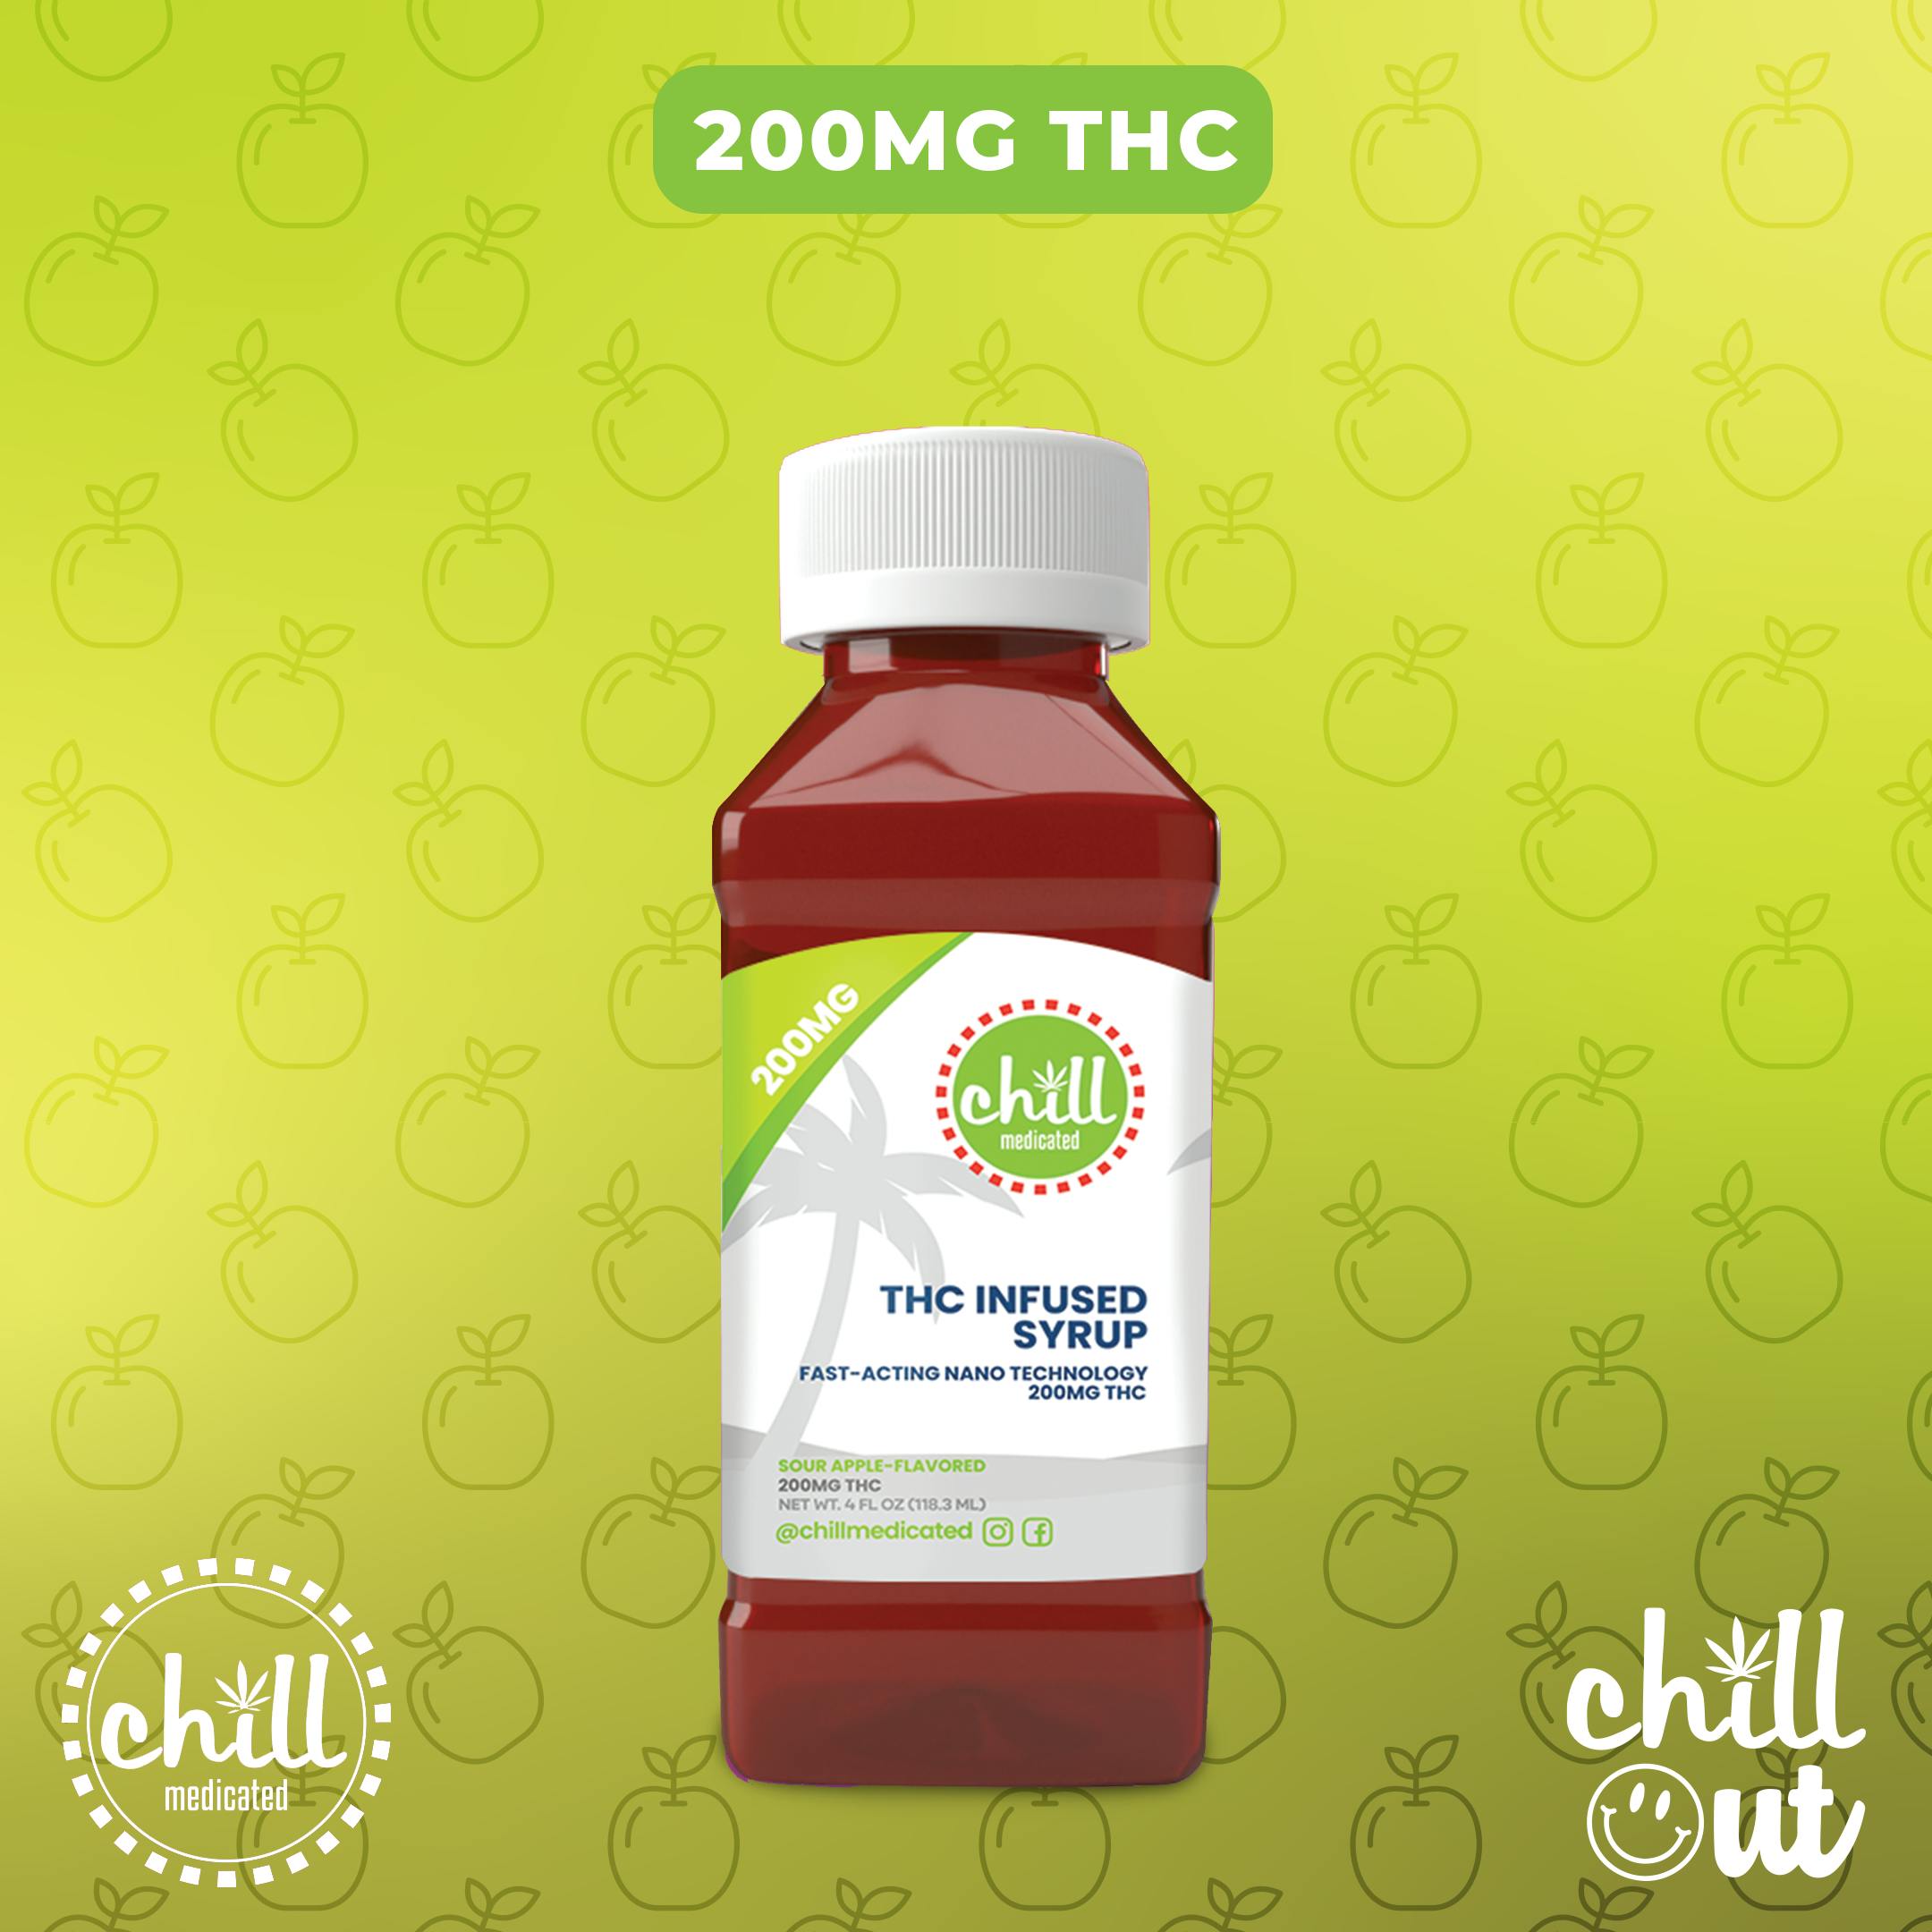 Chill Out CBD: Sour Cherry Juice, Bos